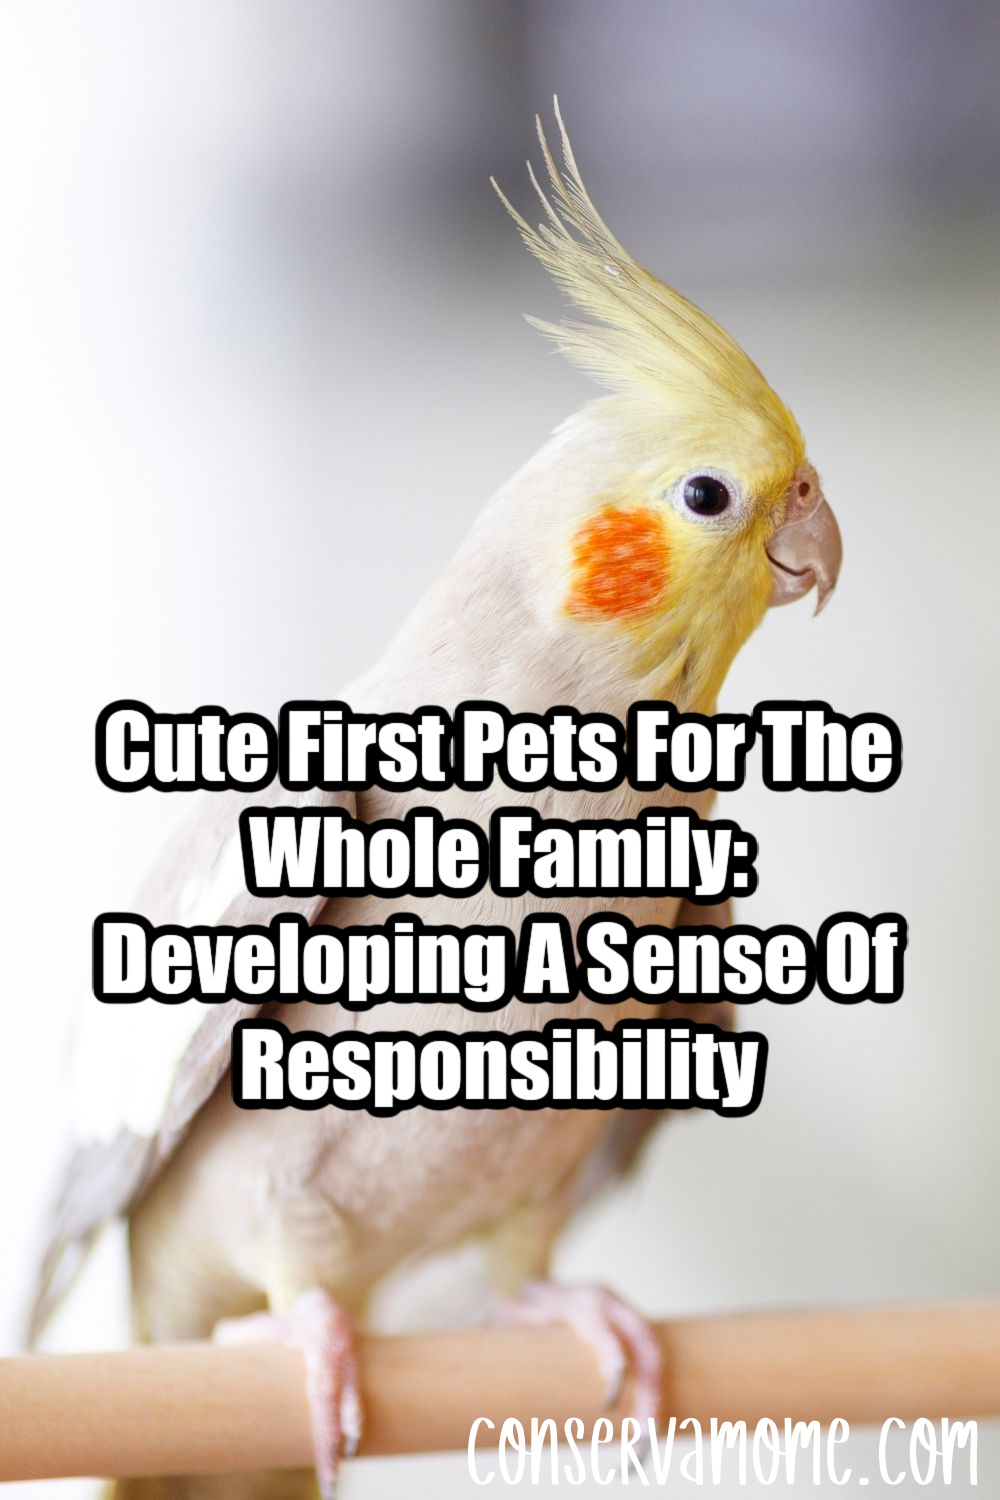 Cute First Pets For The Whole Family: Developing A Sense Of Responsibility